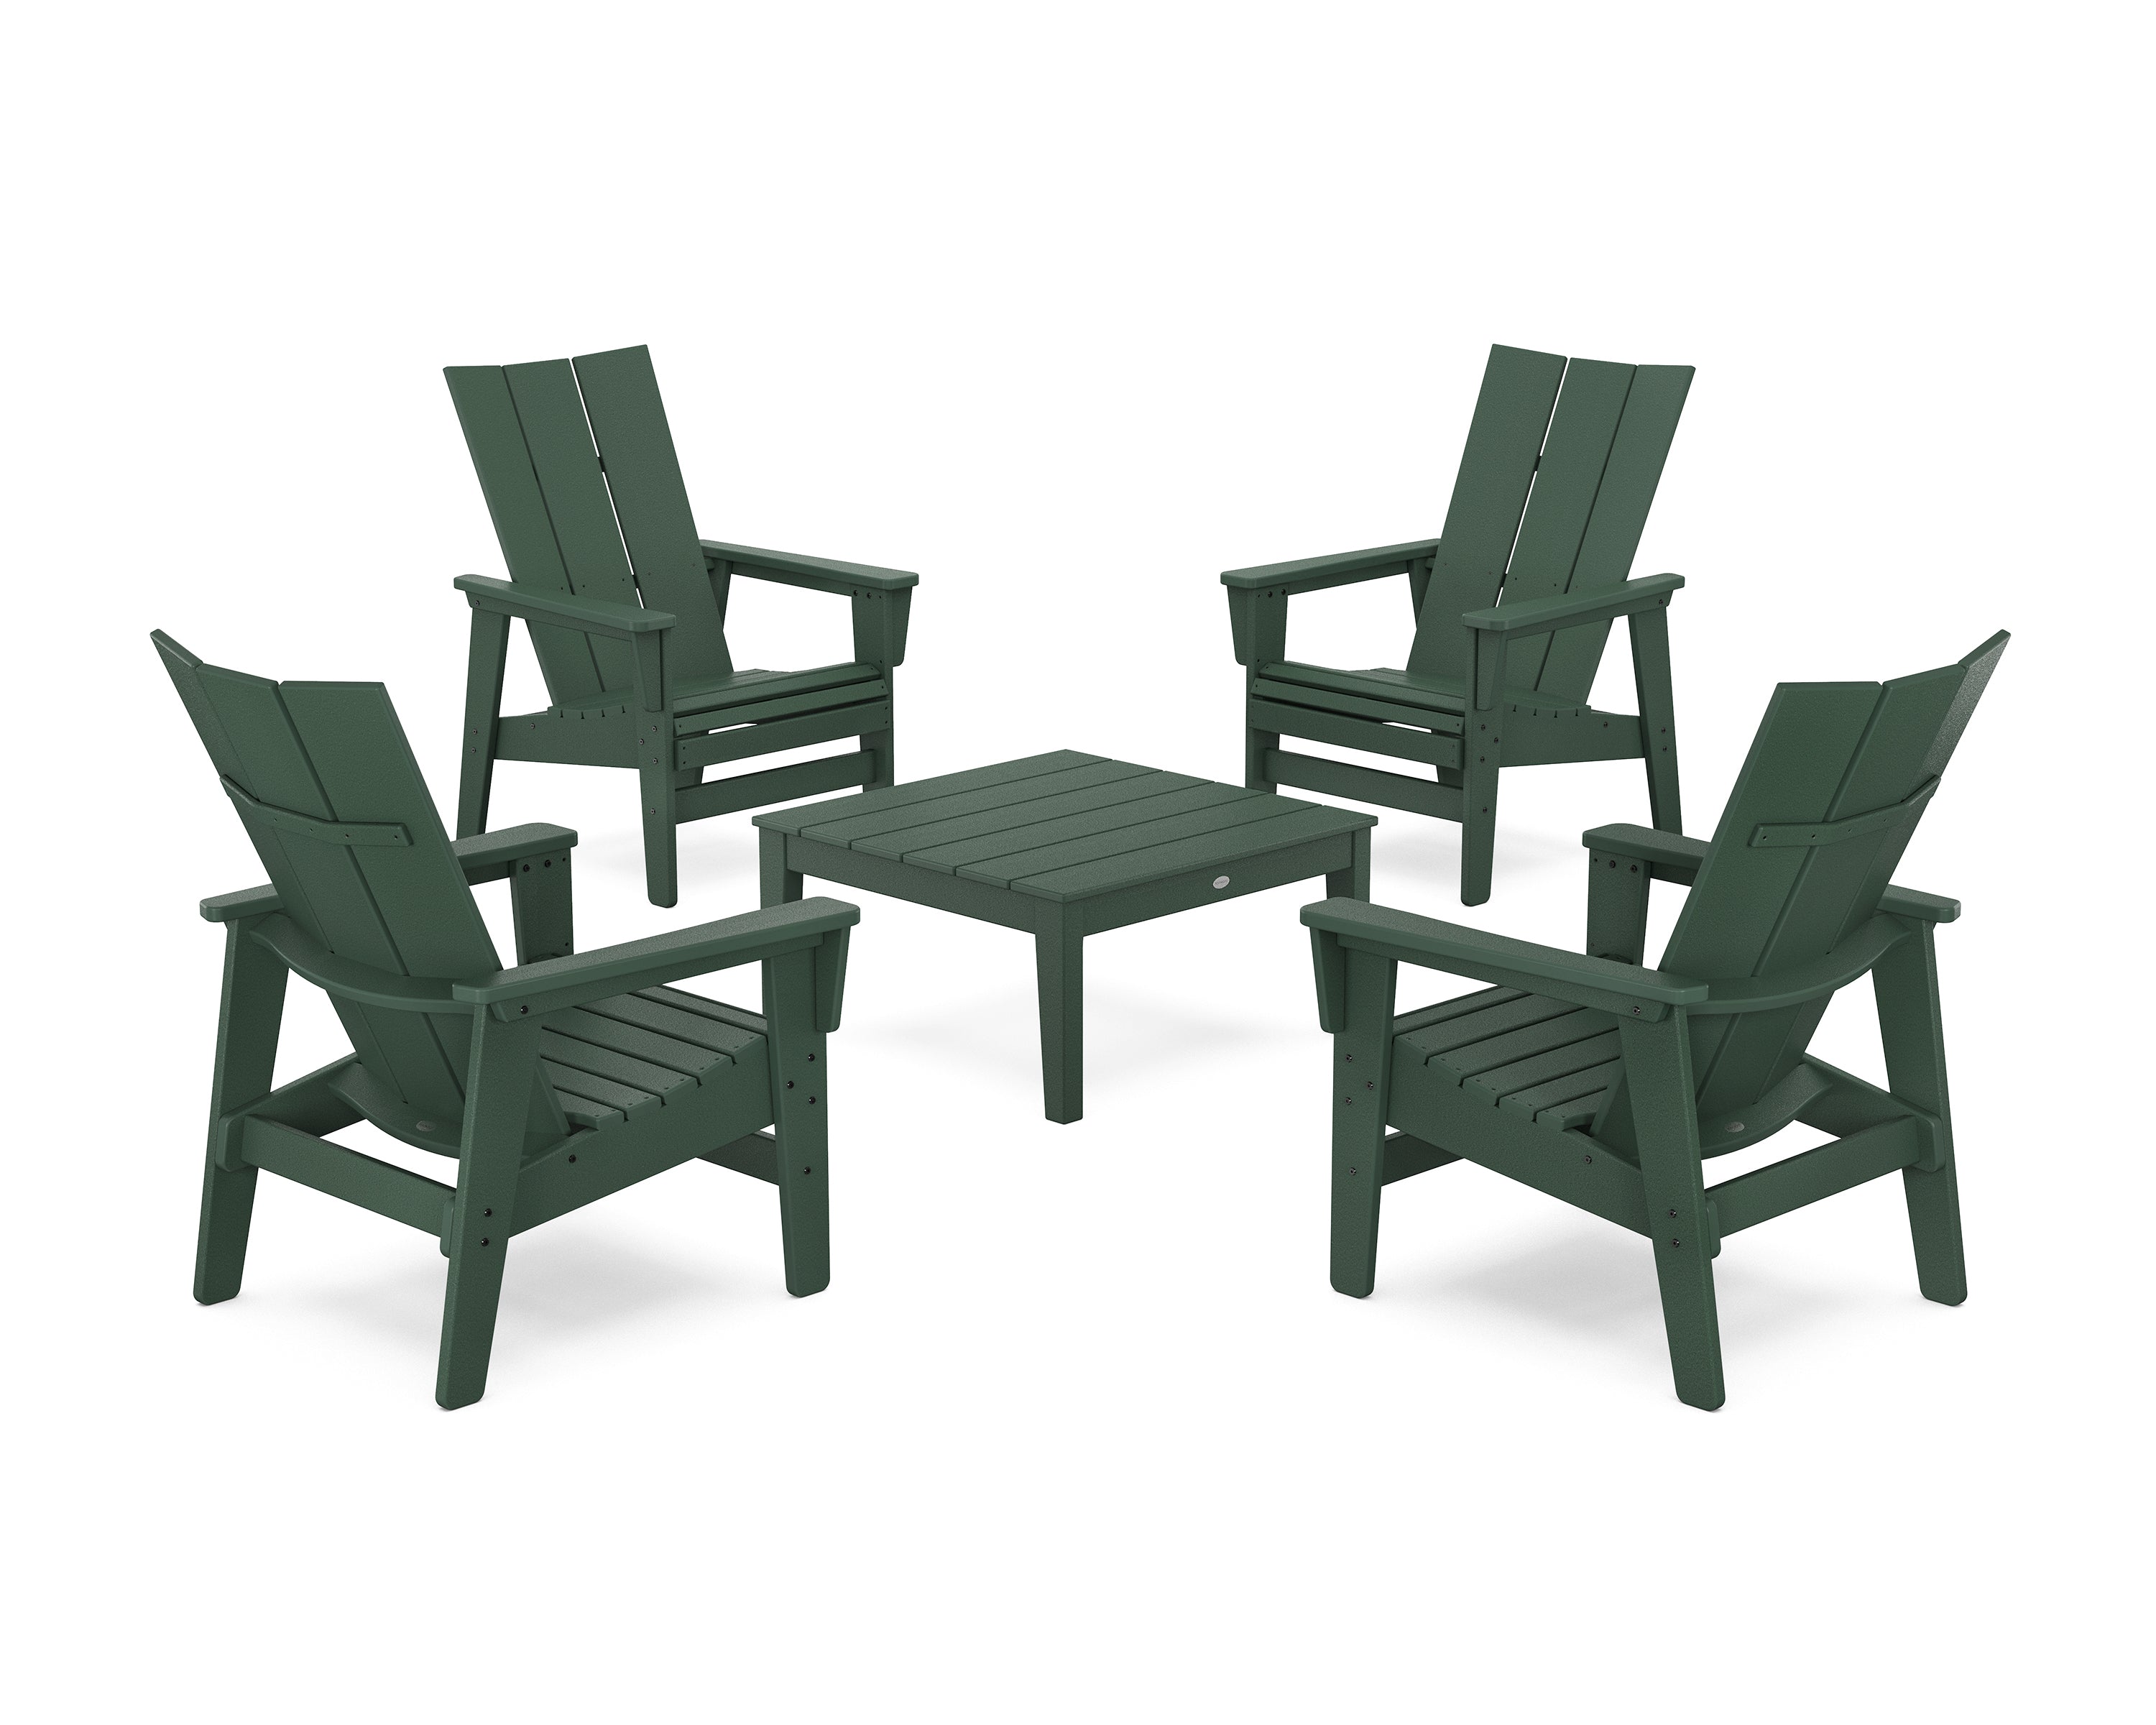 POLYWOOD® 5-Piece Modern Grand Upright Adirondack Chair Conversation Group in Green